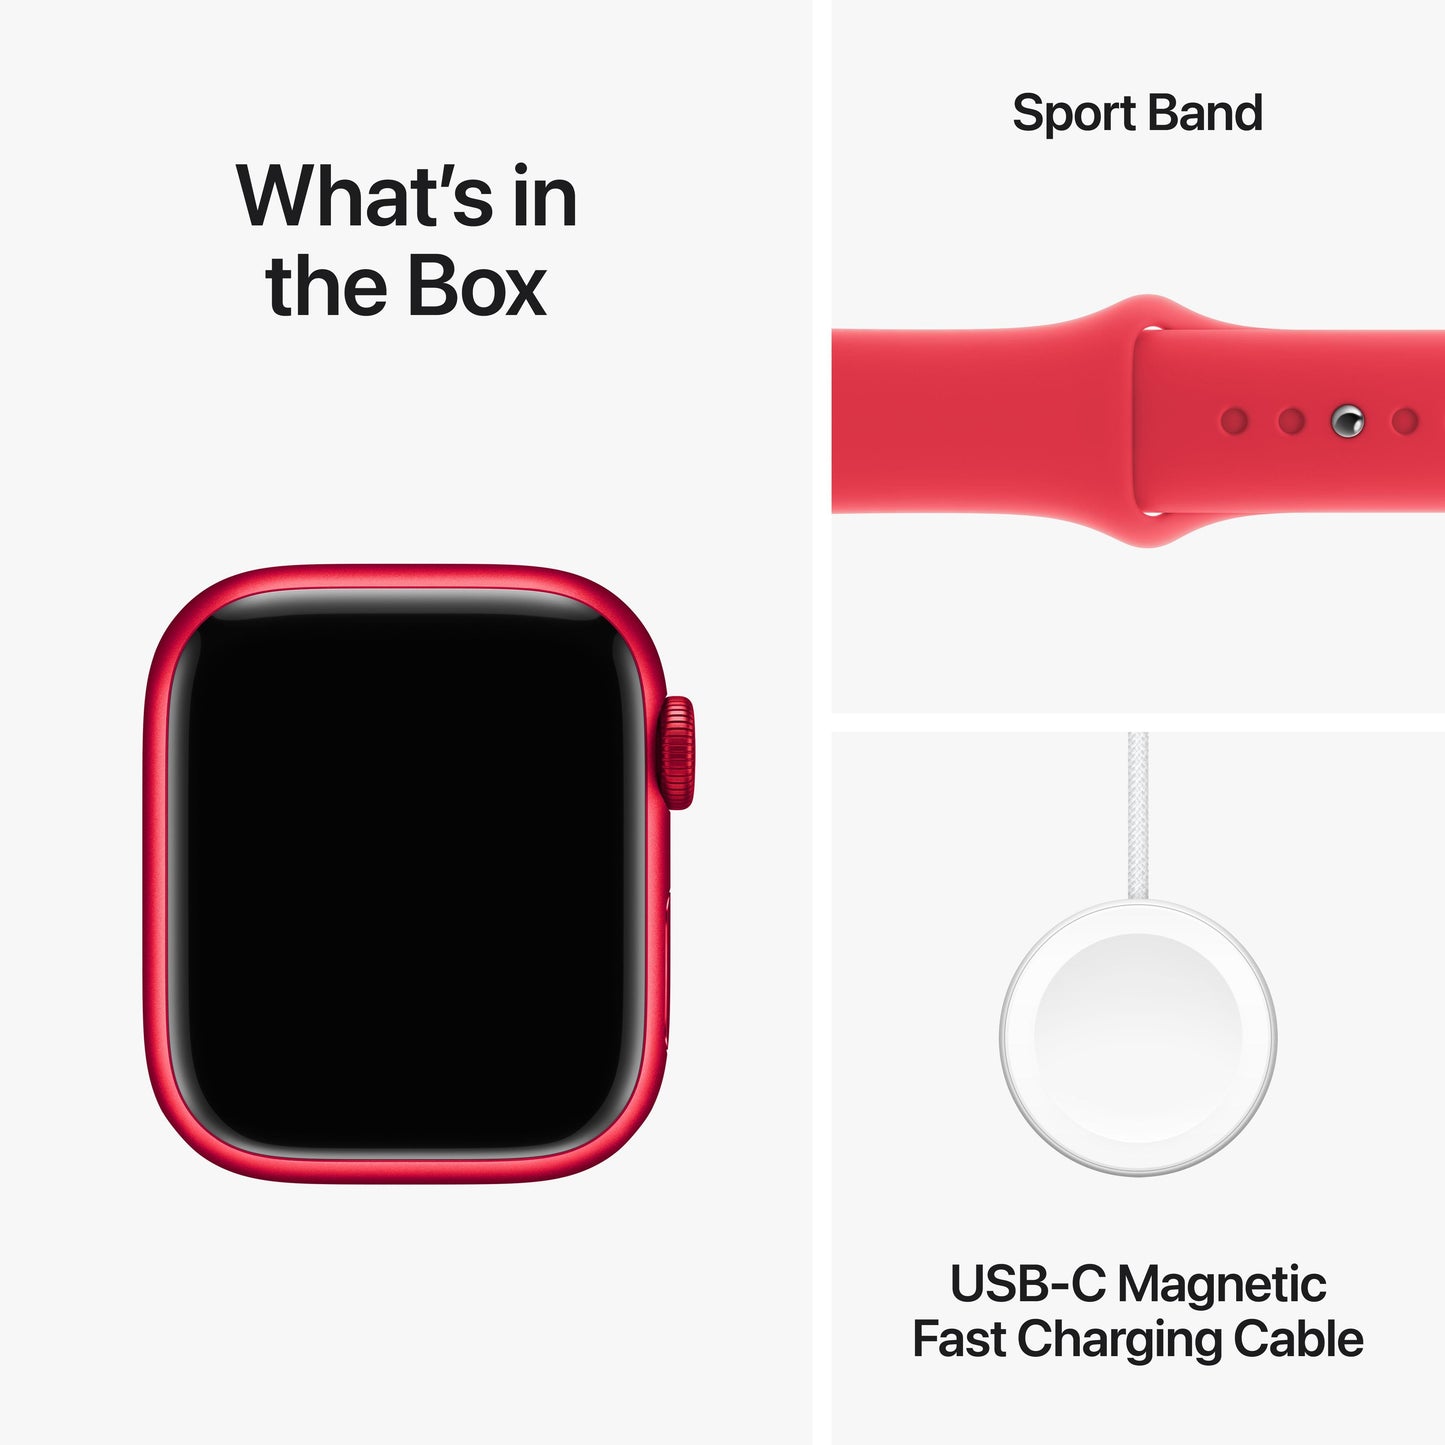 Apple Watch Series 9 GPS + Cellular 41mm (PRODUCT)RED Aluminium Case with (PRODUCT)RED Sport Band - S/M